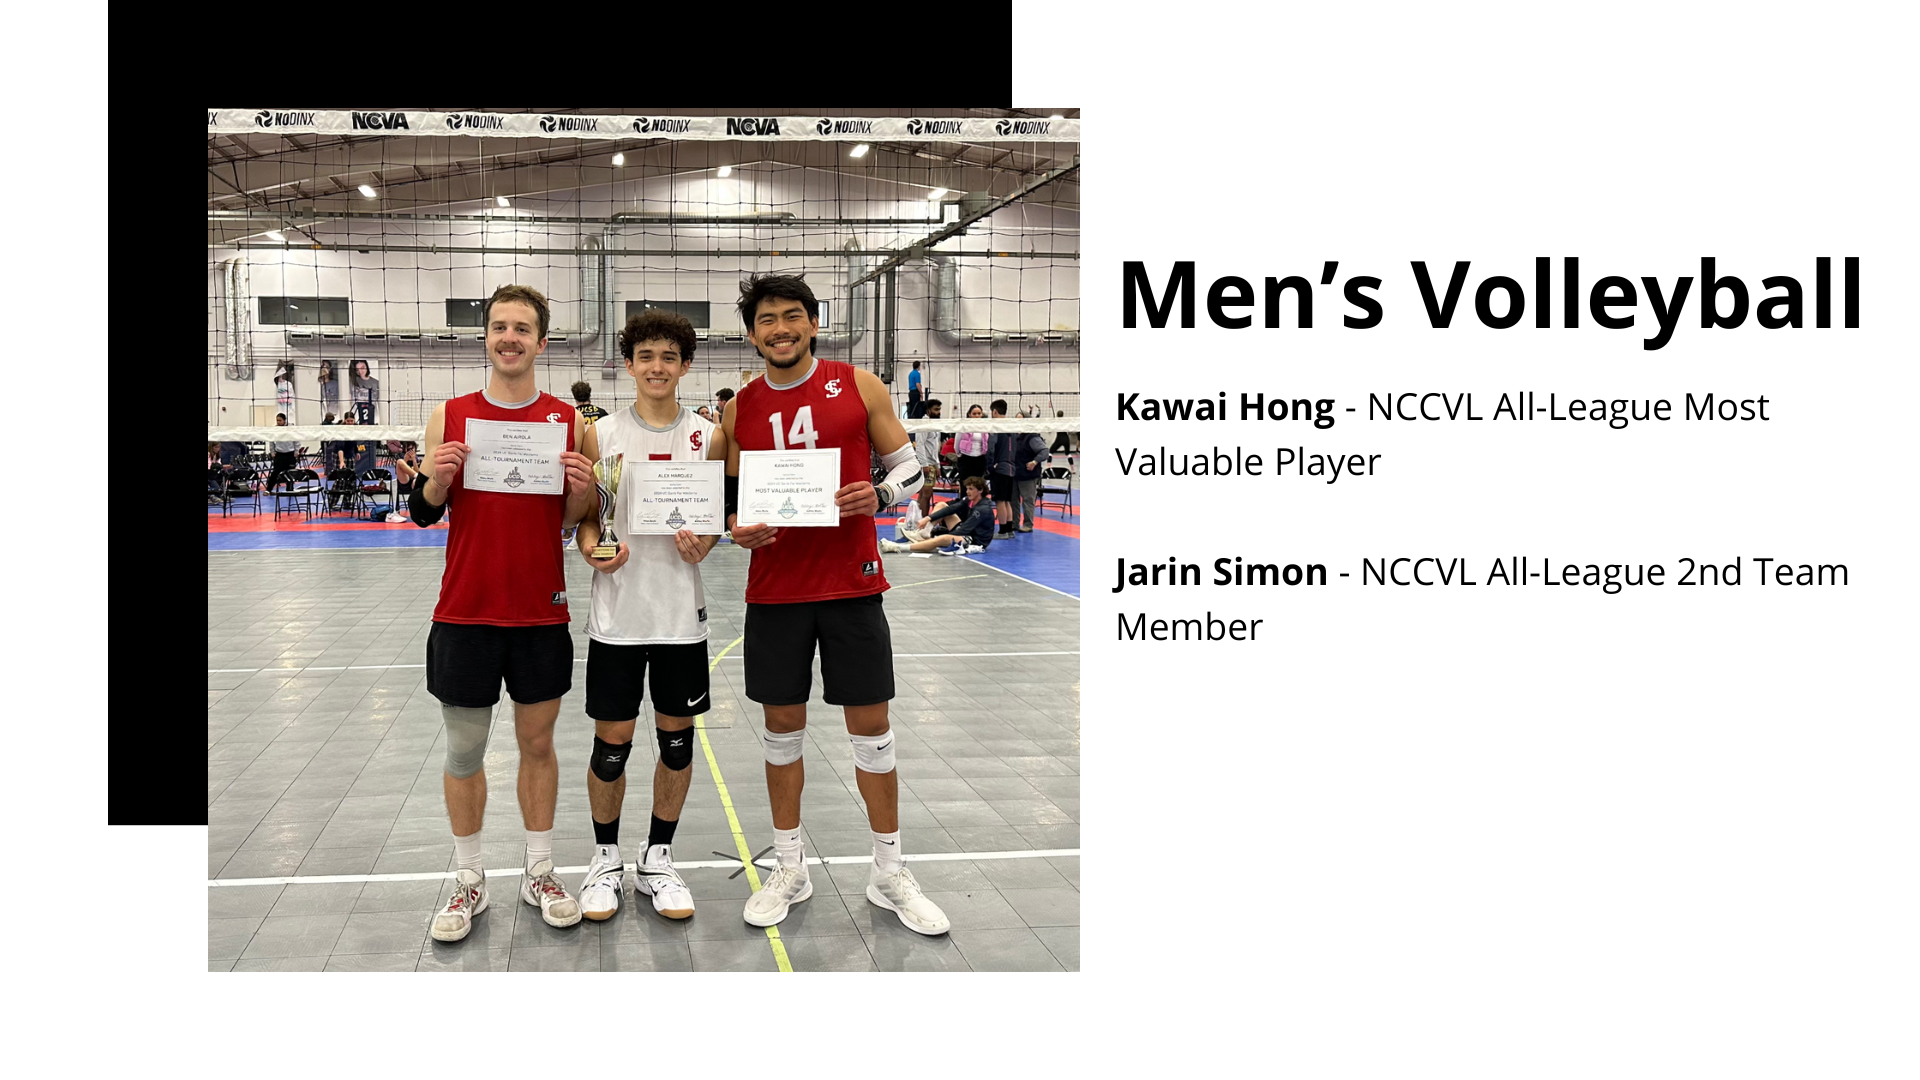 Picture shows three volleyball players on the left and states: Kawai hong - NCCVL All-League Most Valuable Player and Jarin Simon - NccVL All league 2nd team member